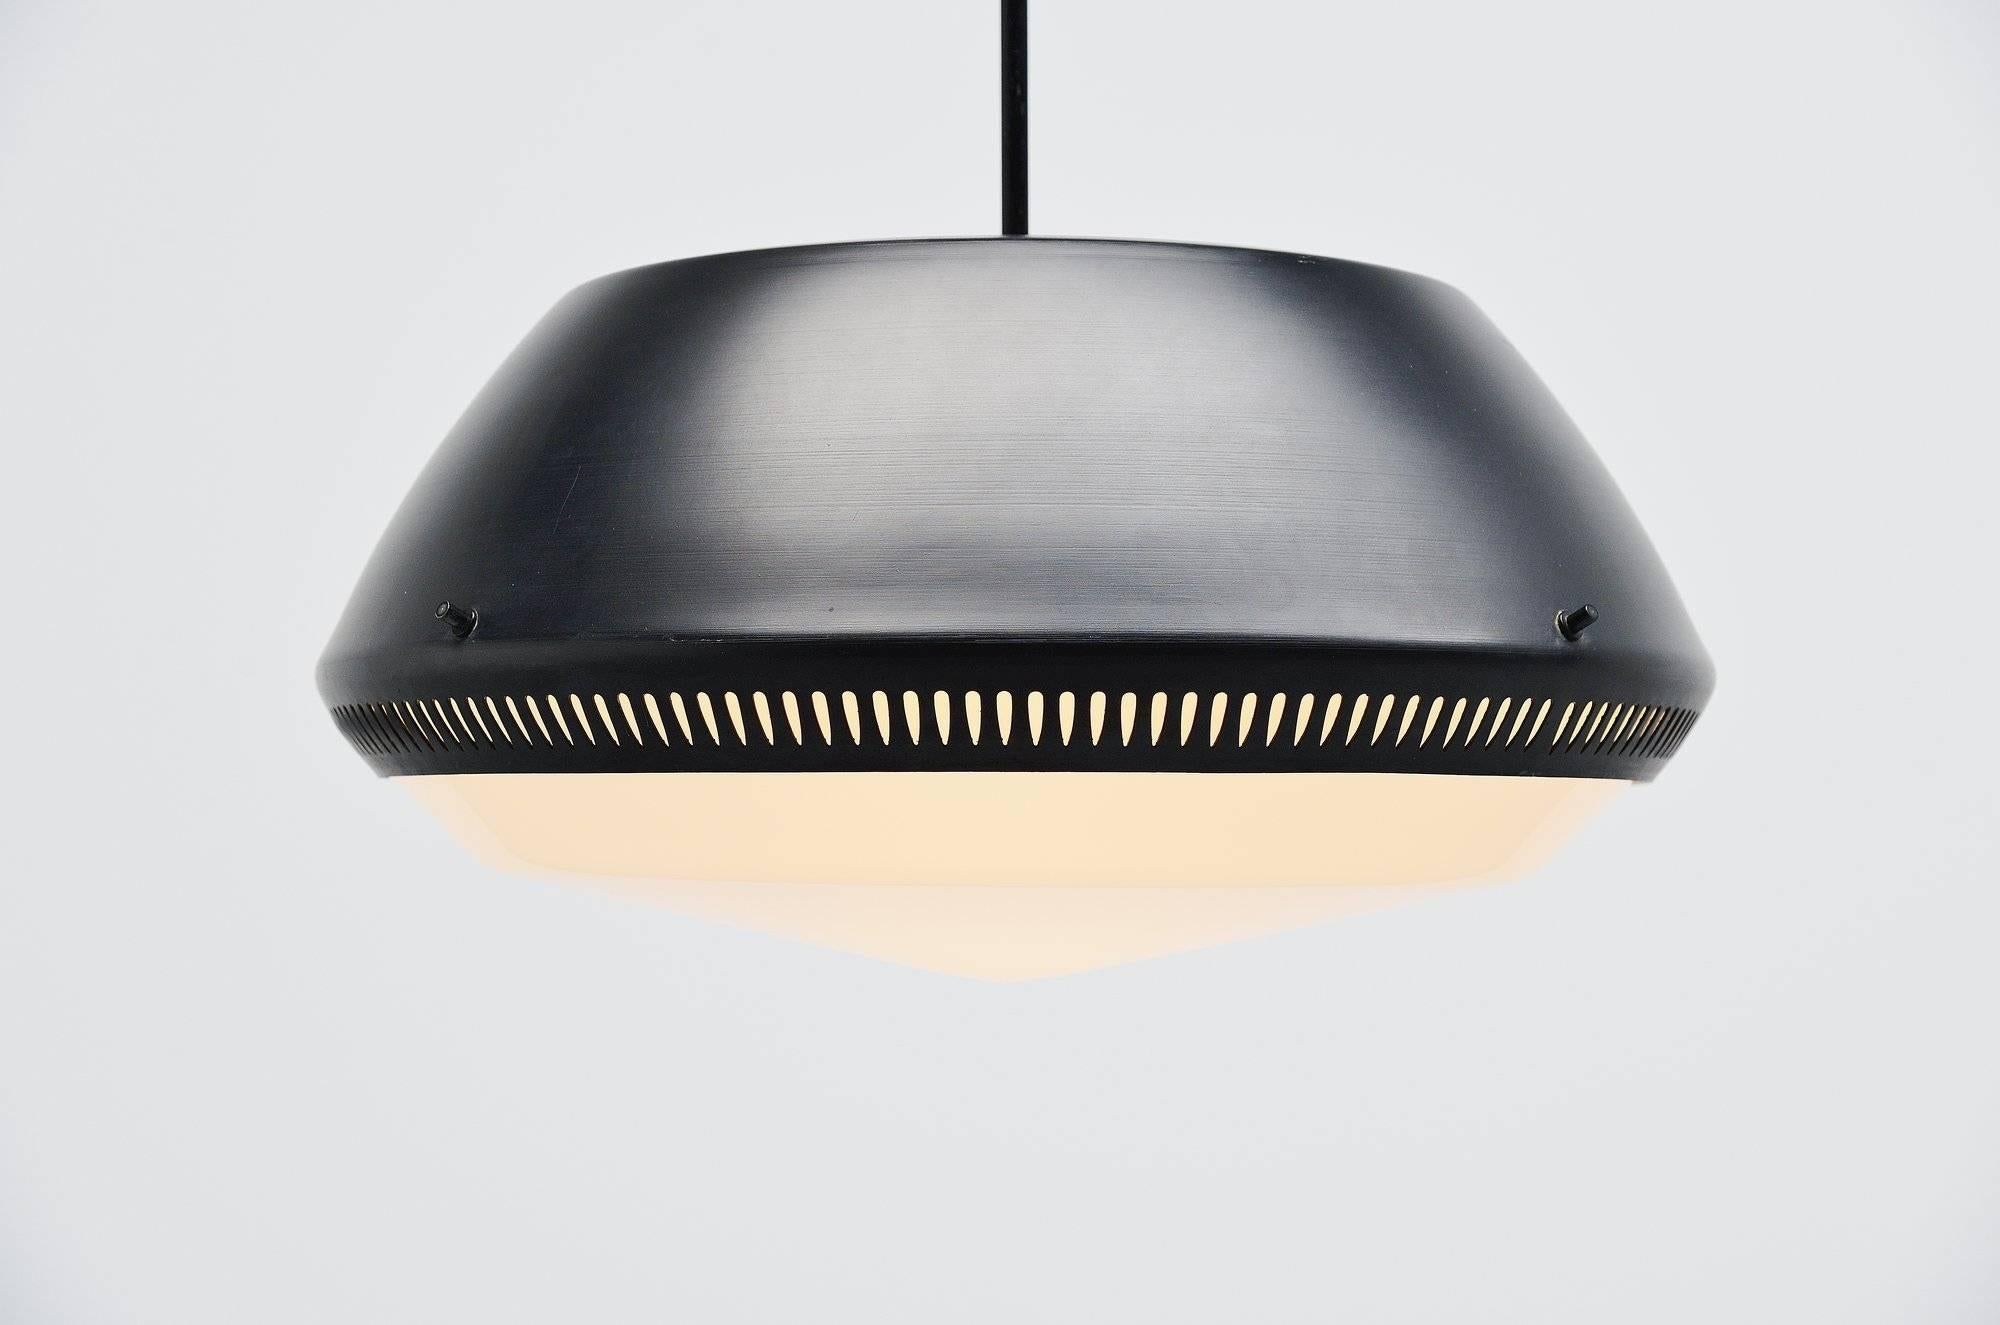 Rare and large pendant lamp designed by Sergio Asti for Artelcuce Milano, Italy 1950. This super large and nicely shaped pendant lamp is often sold as a design by Gino Sarfatti but this lamp was designed by Sergio Asti. The lamp has a black painted